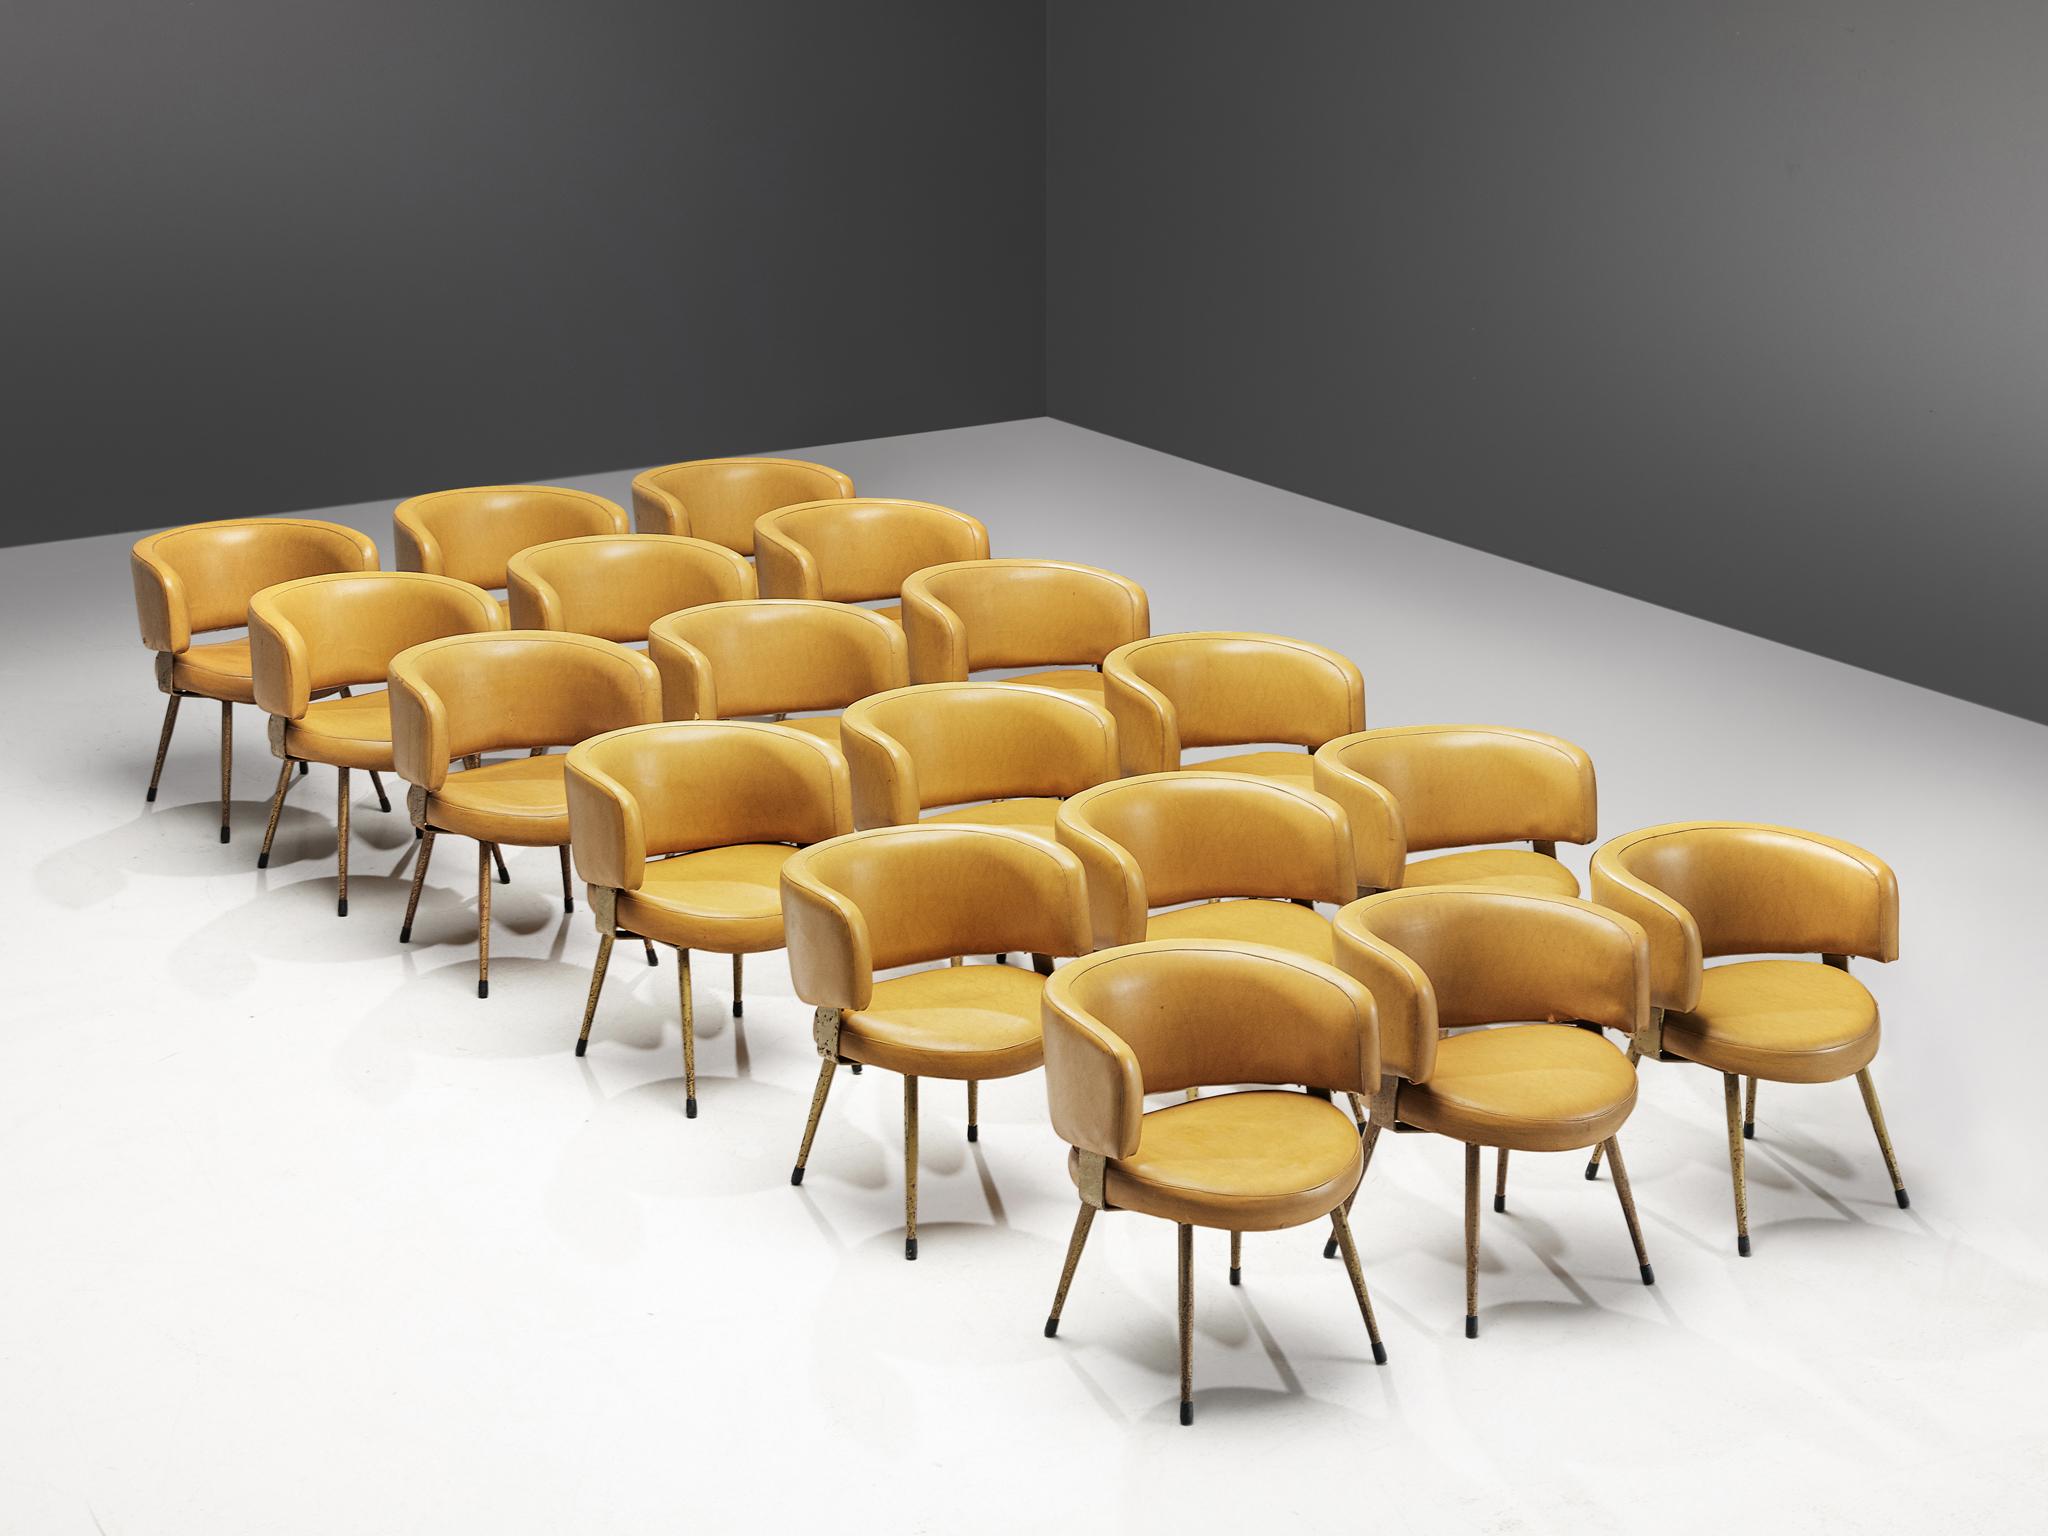 Large set of armchairs, leatherette and metal, Italy, 1970s

A large set of 18 dining chairs with curved backrests that surround the seater, creating a comfortable and embracing feeling. The chairs feature a mustard yellow colored upholstery,